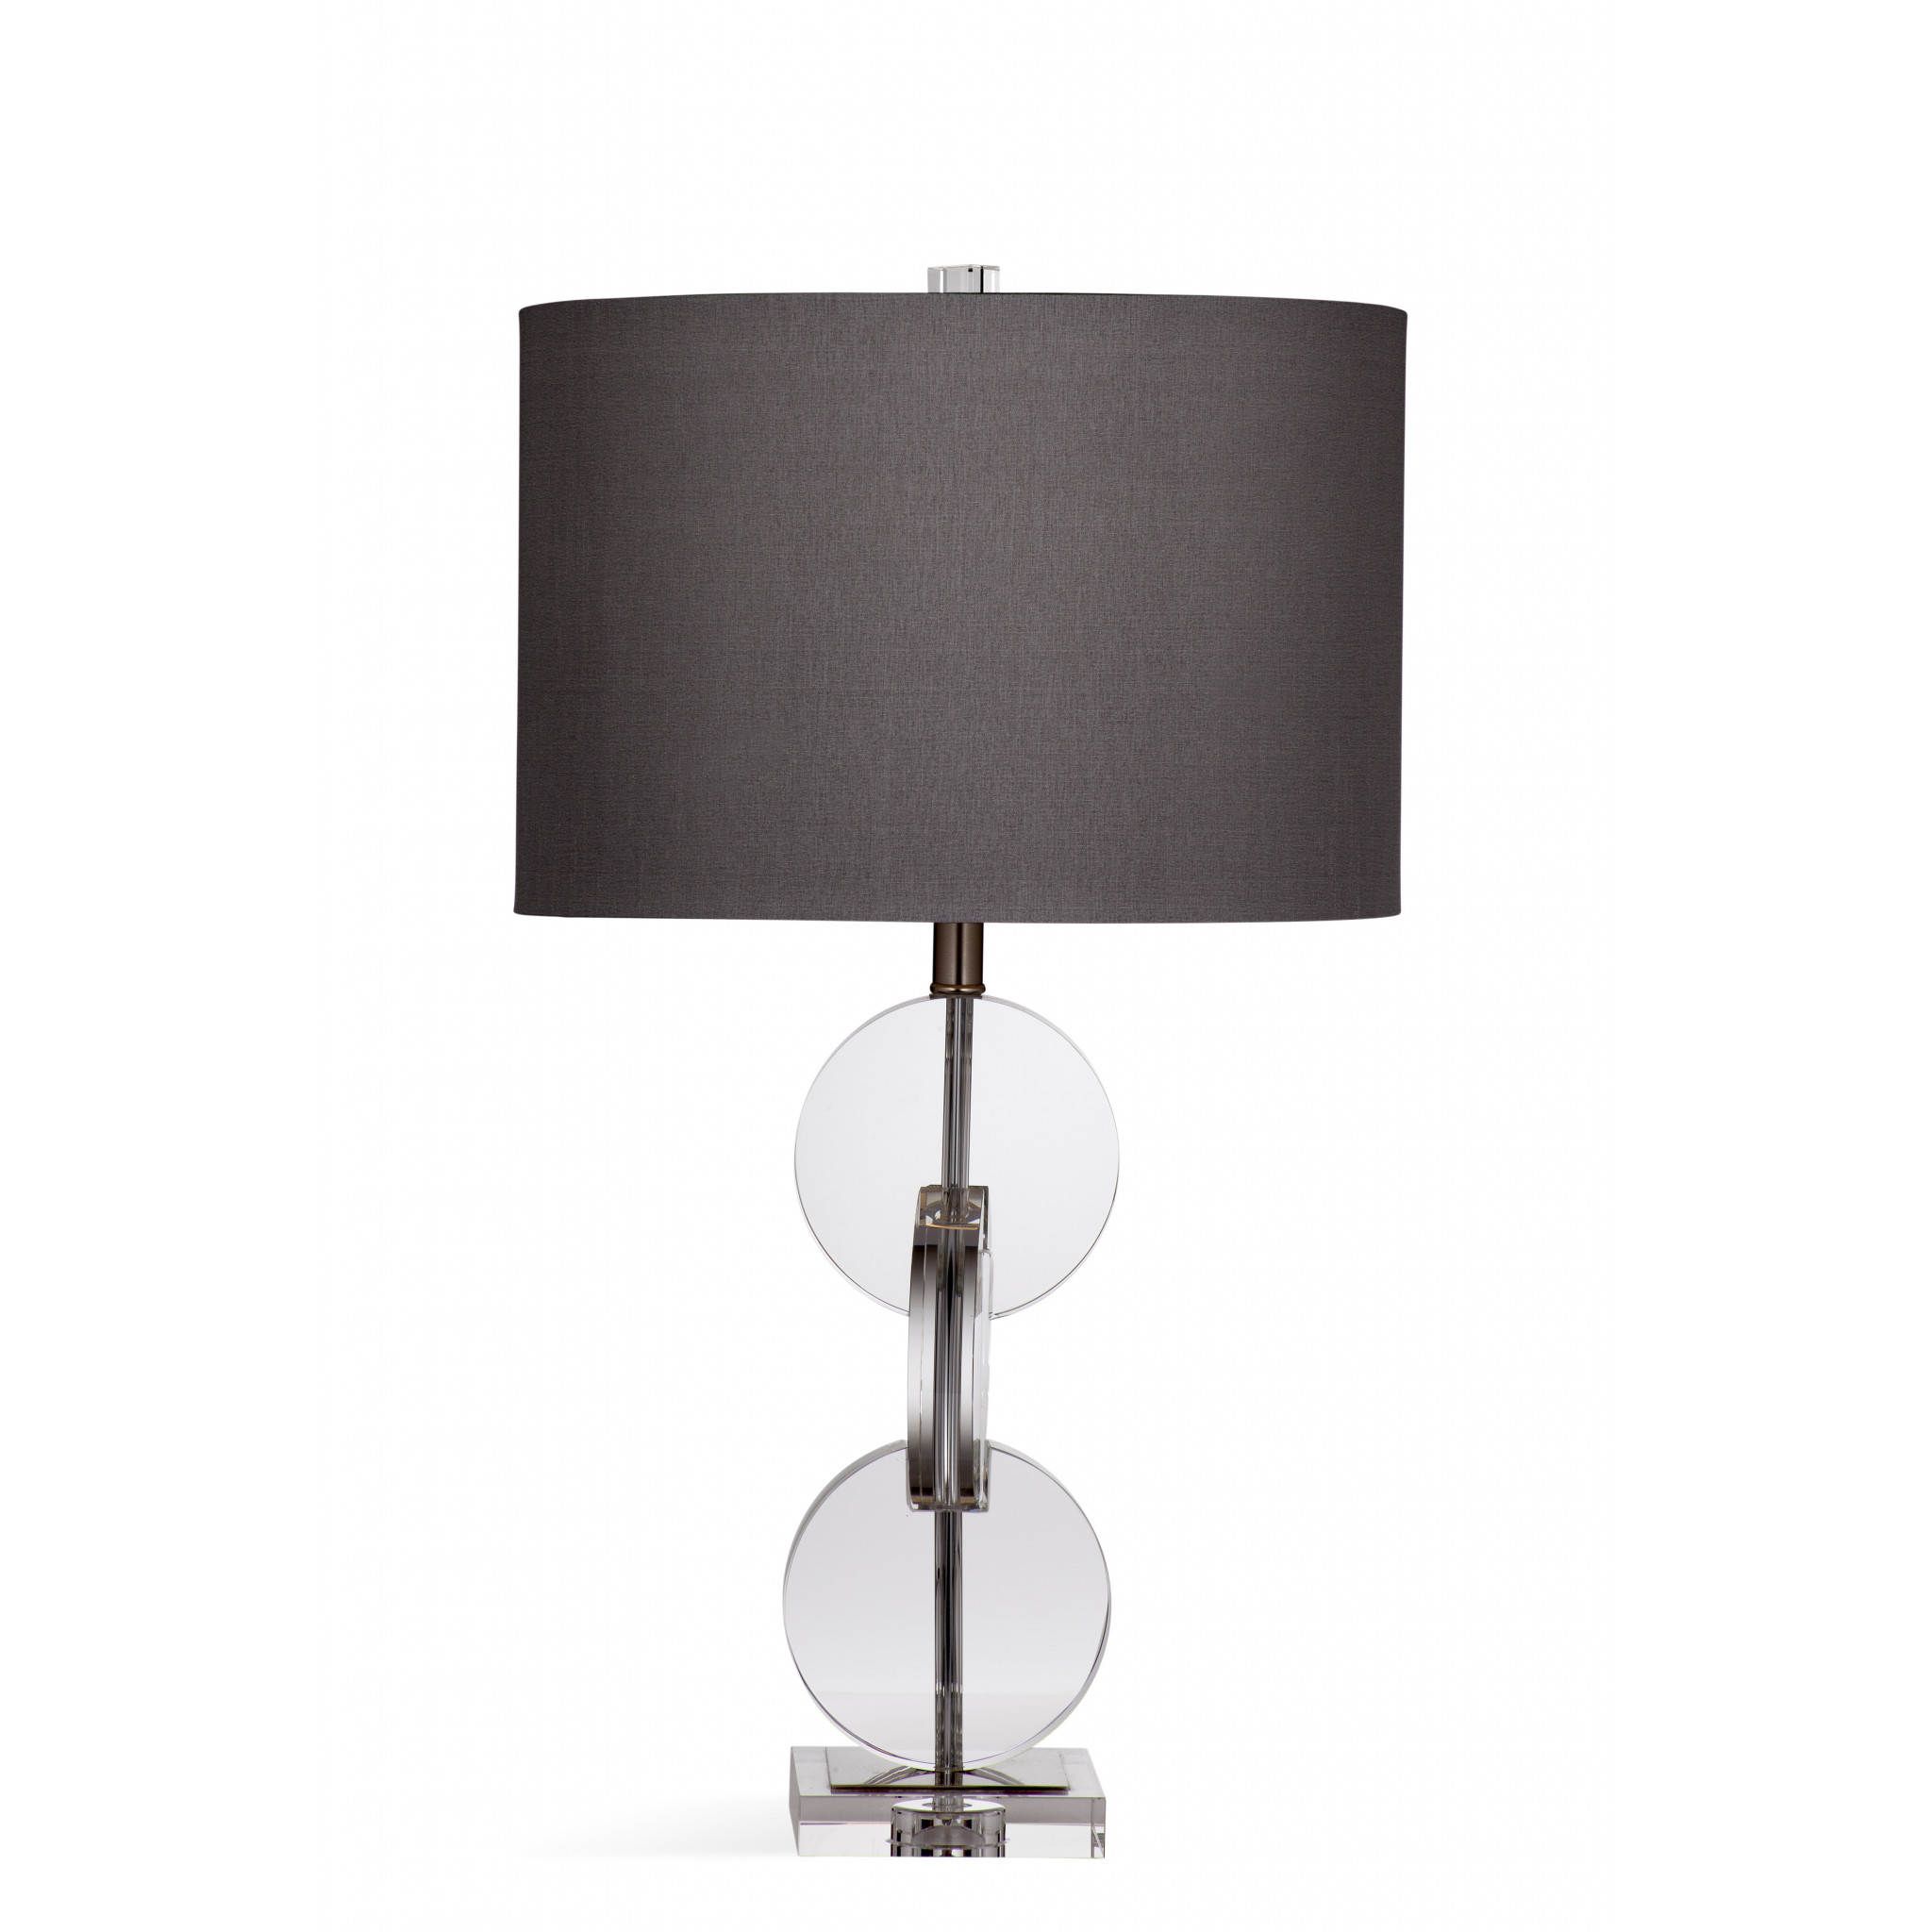 Bassett Mirror Juliana Crystal Table Lamp | The Classy Home Inside Juliana Accent Mirrors (View 19 of 20)